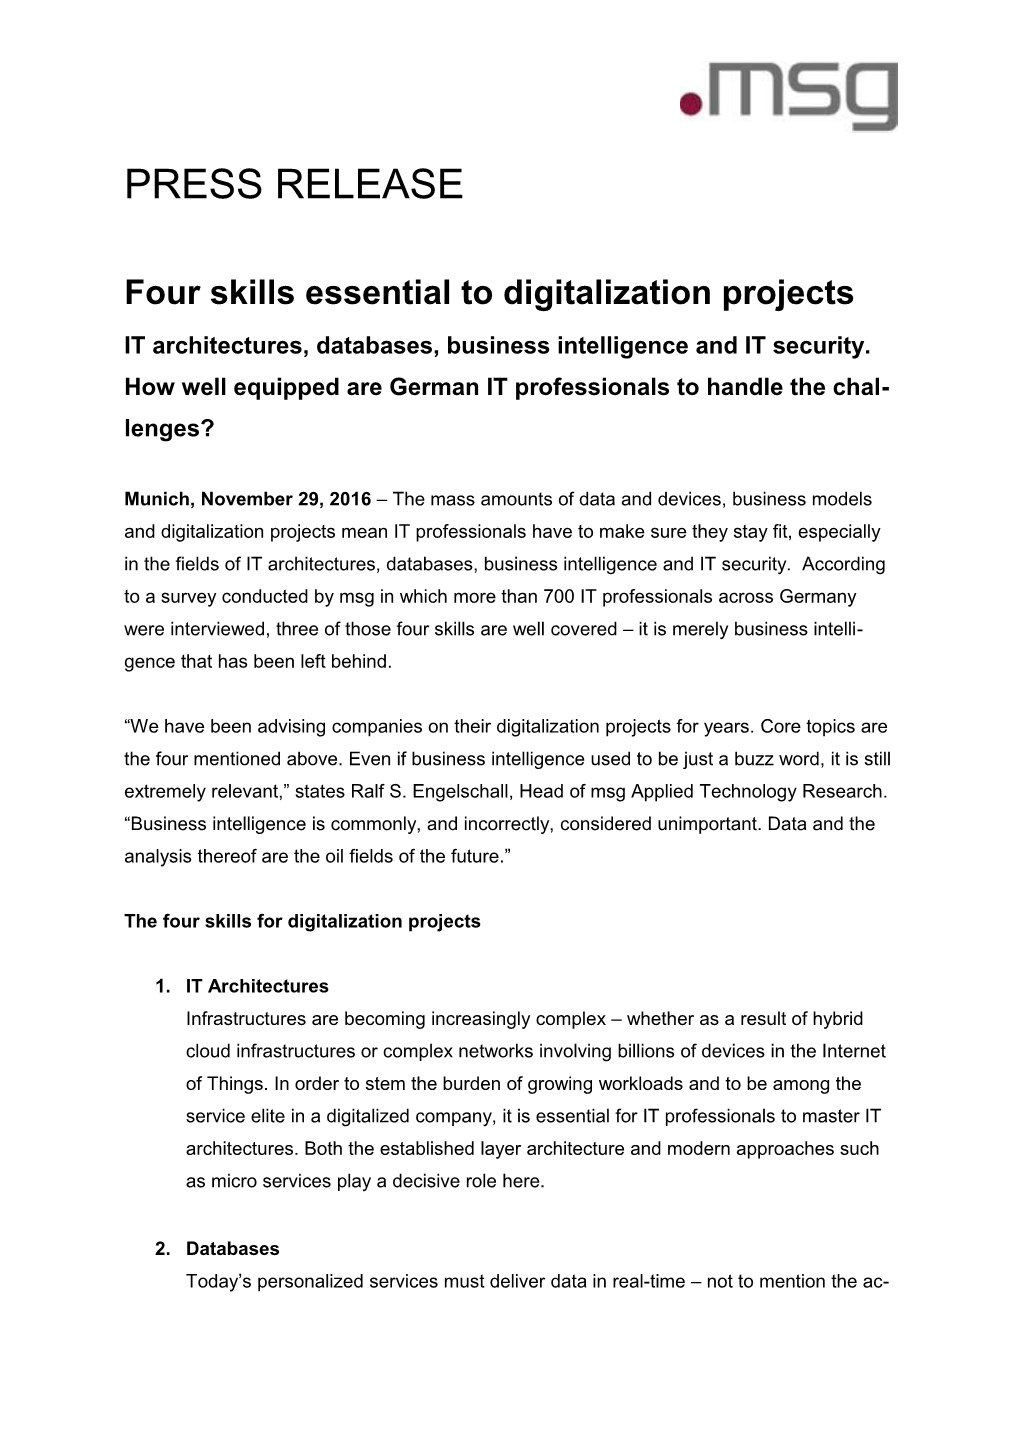 Four Skills Essential to Digitalization Projects